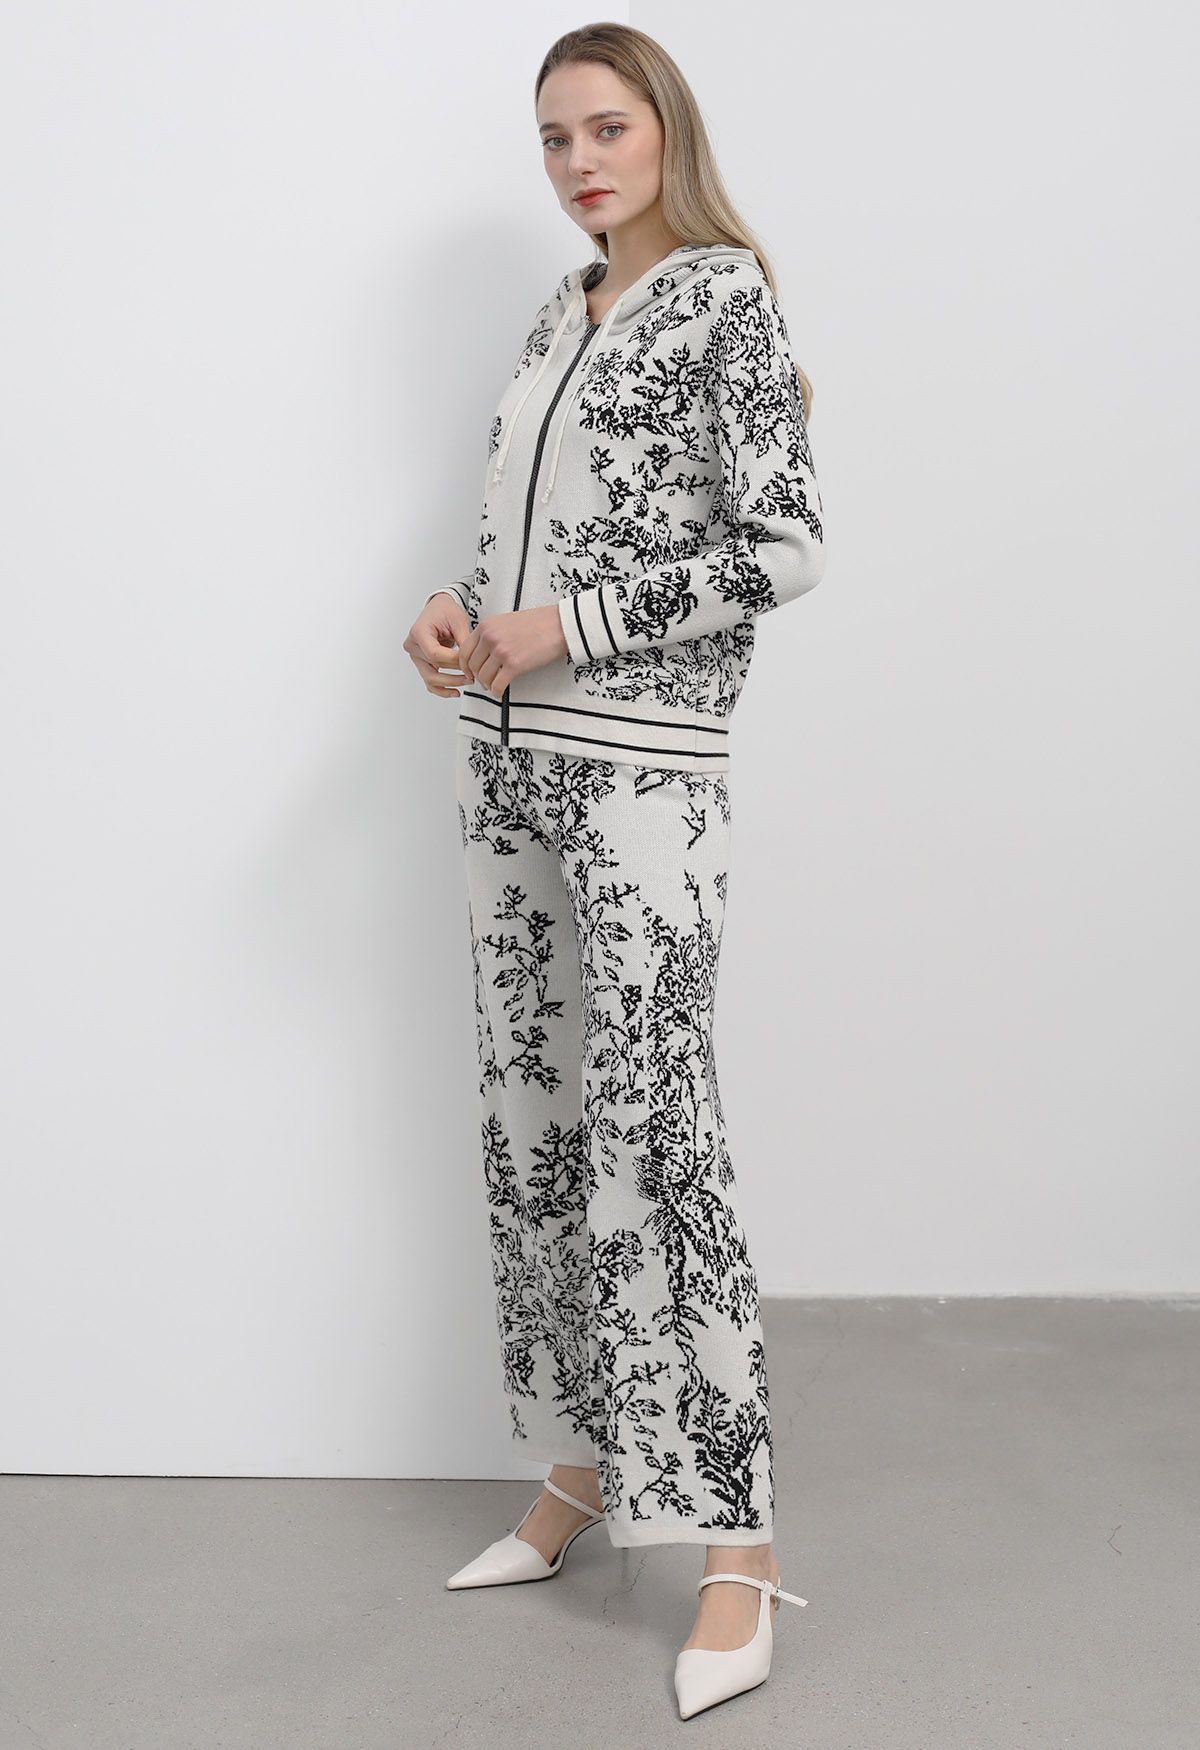 Botanical Zipper Knit Cardigan and Pants Set in Ivory